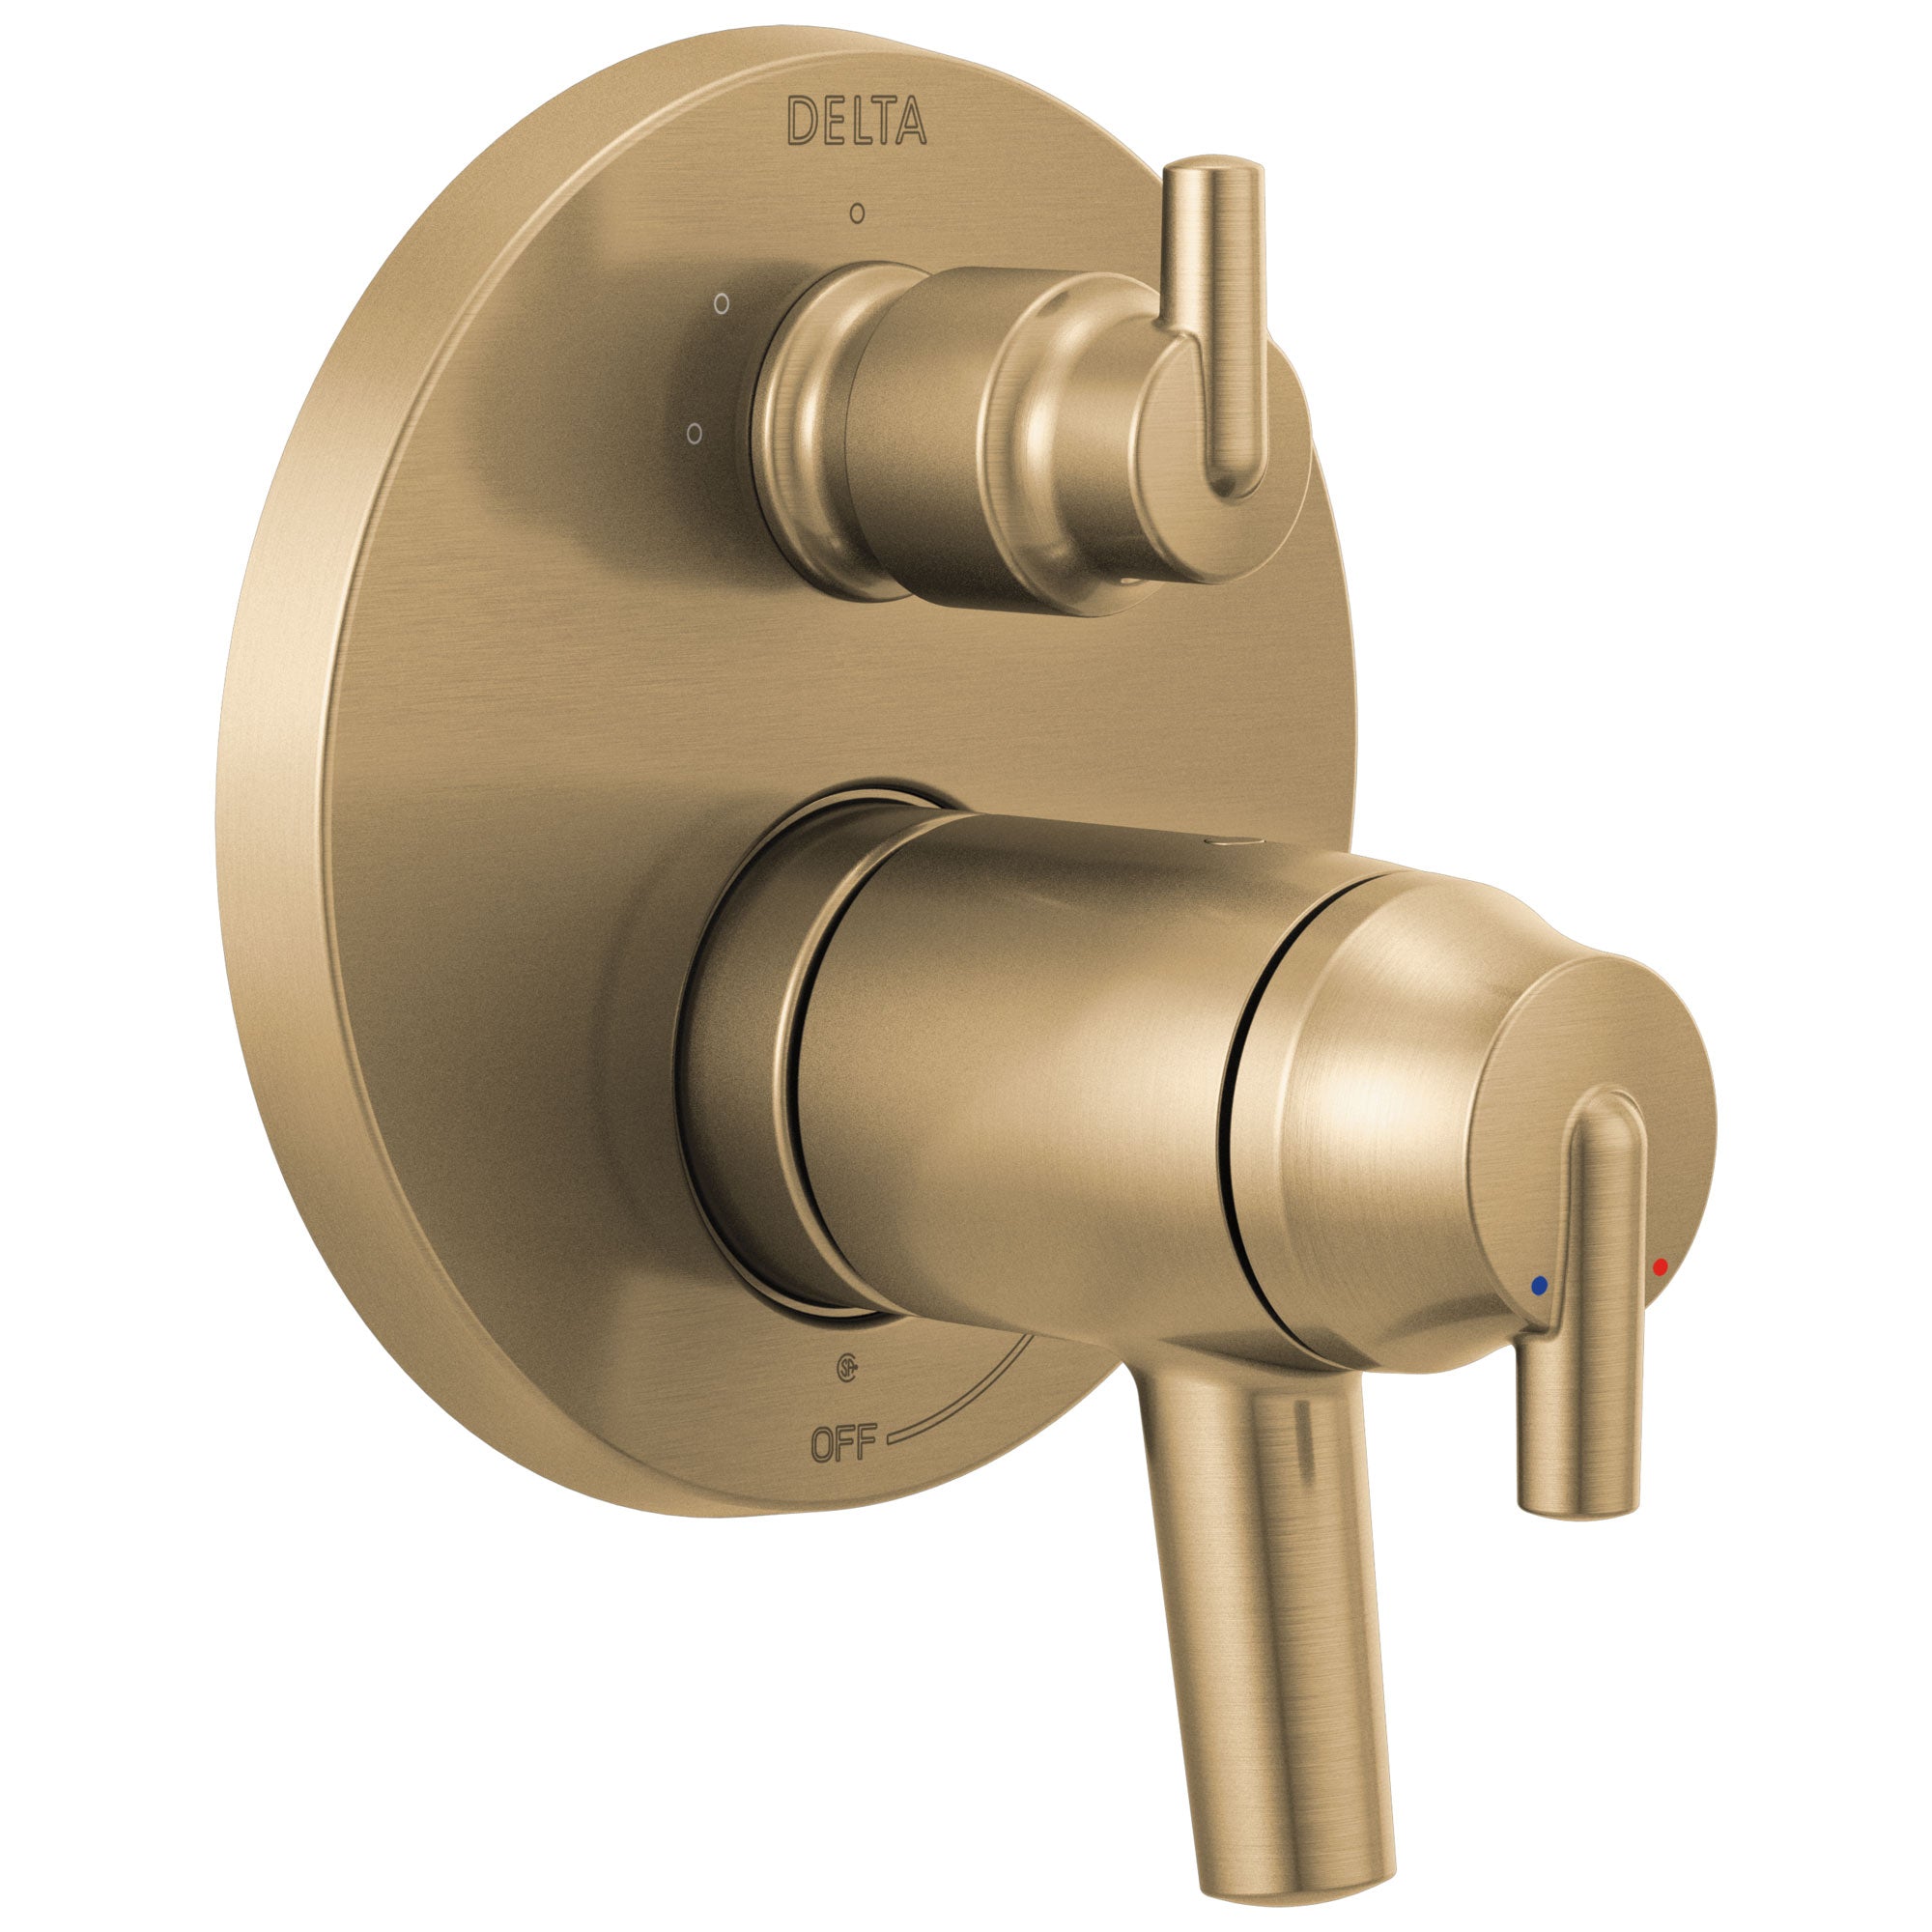 Delta Trinsic Champagne Bronze Finish Modern Thermostatic Shower Faucet Control with 3-Setting Integrated Diverter Includes Valve and Handles D3694V